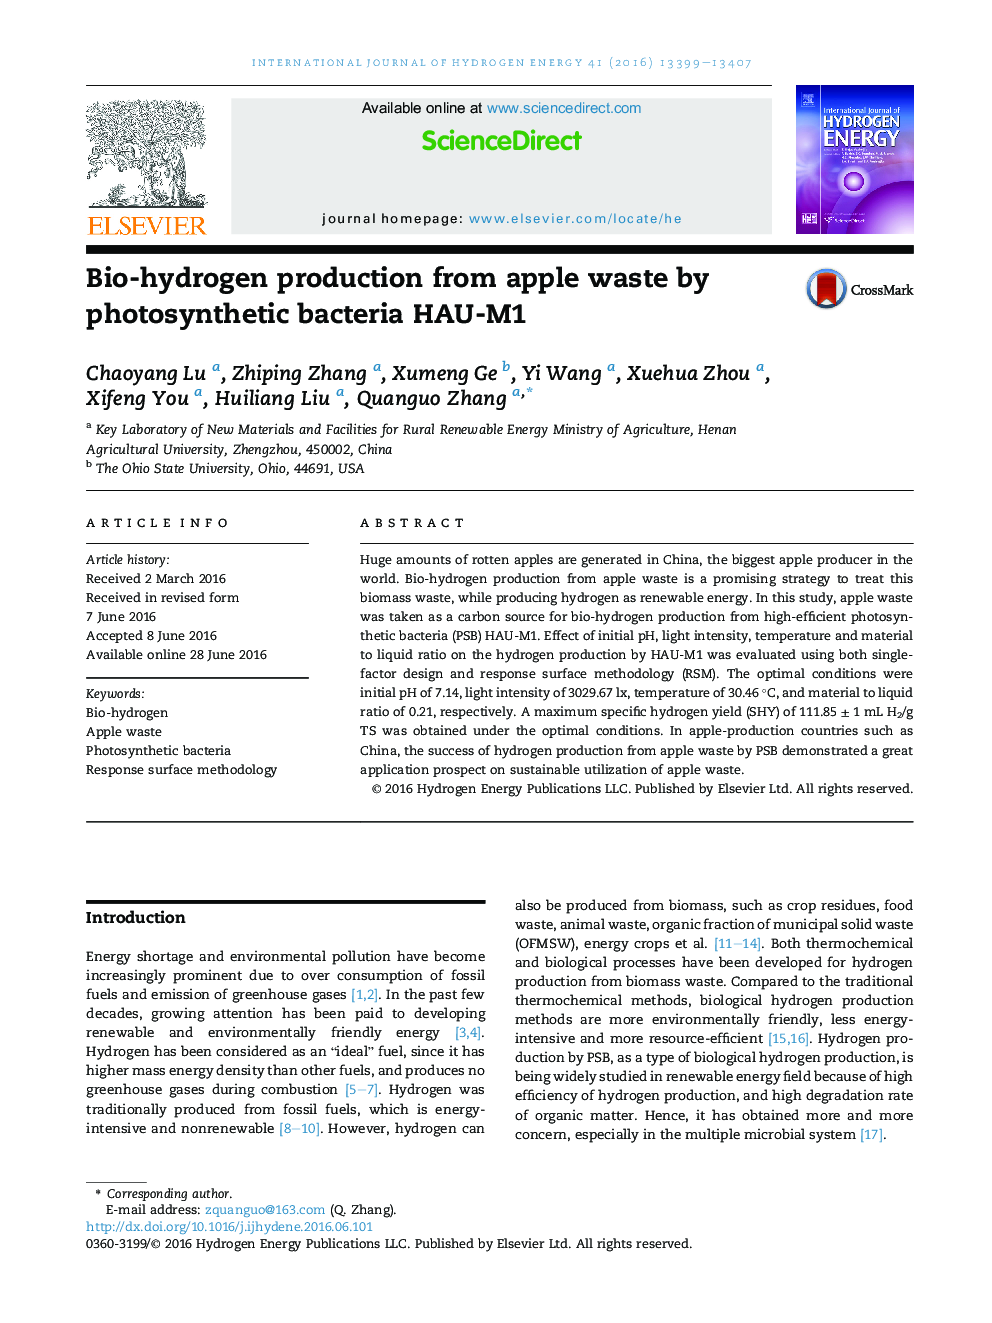 Bio-hydrogen production from apple waste by photosynthetic bacteria HAU-M1